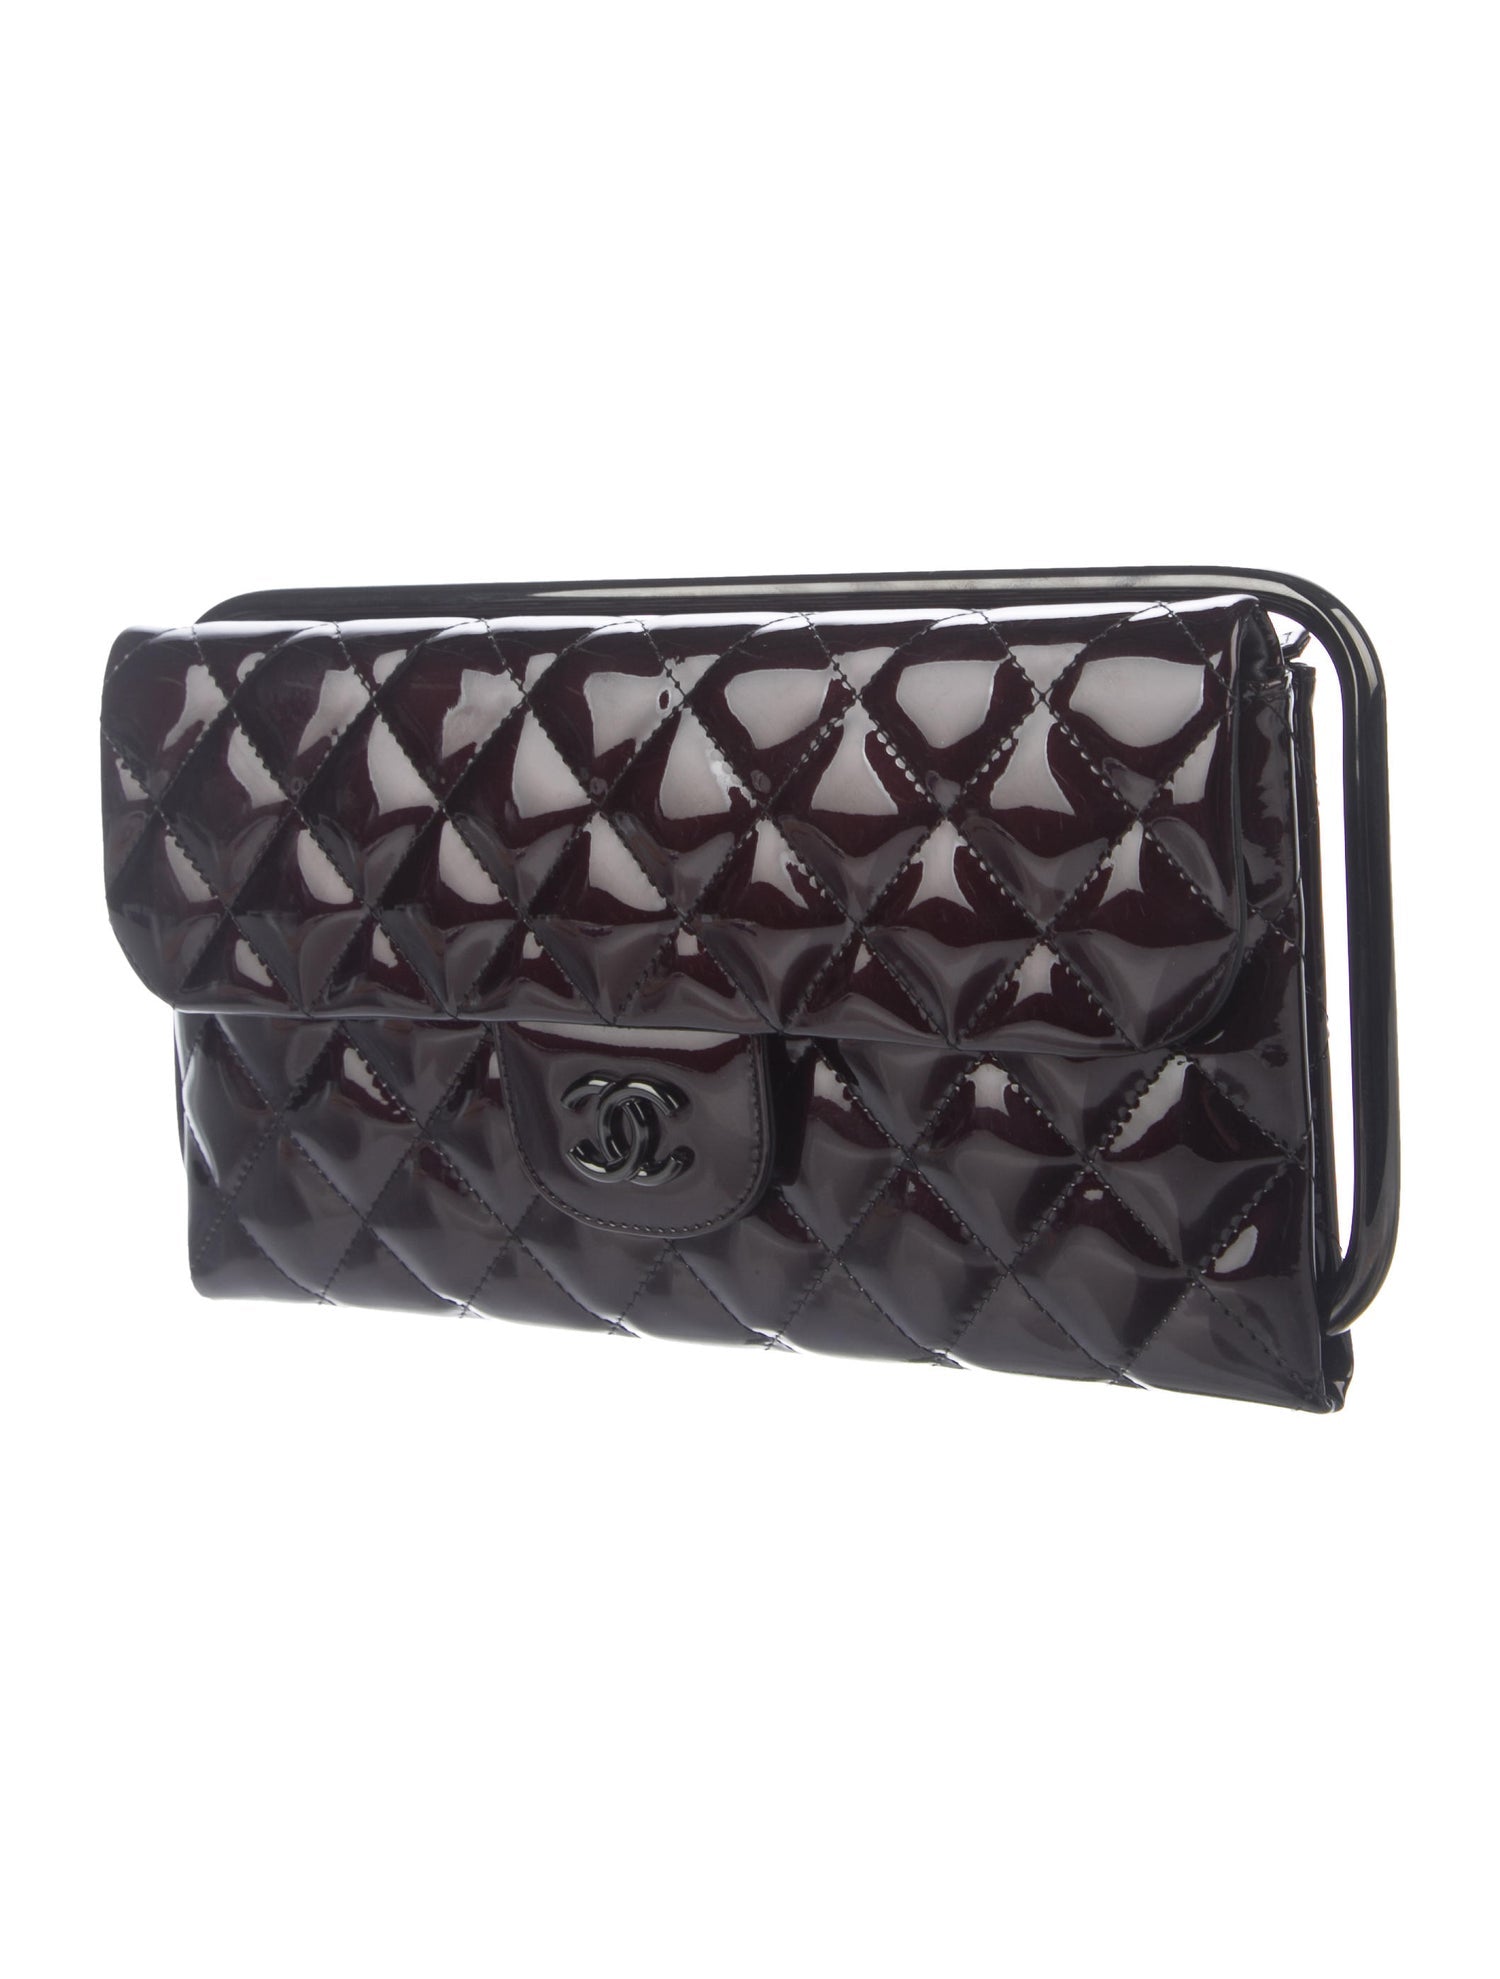 Chanel Clutch With Chain Patent Black / White